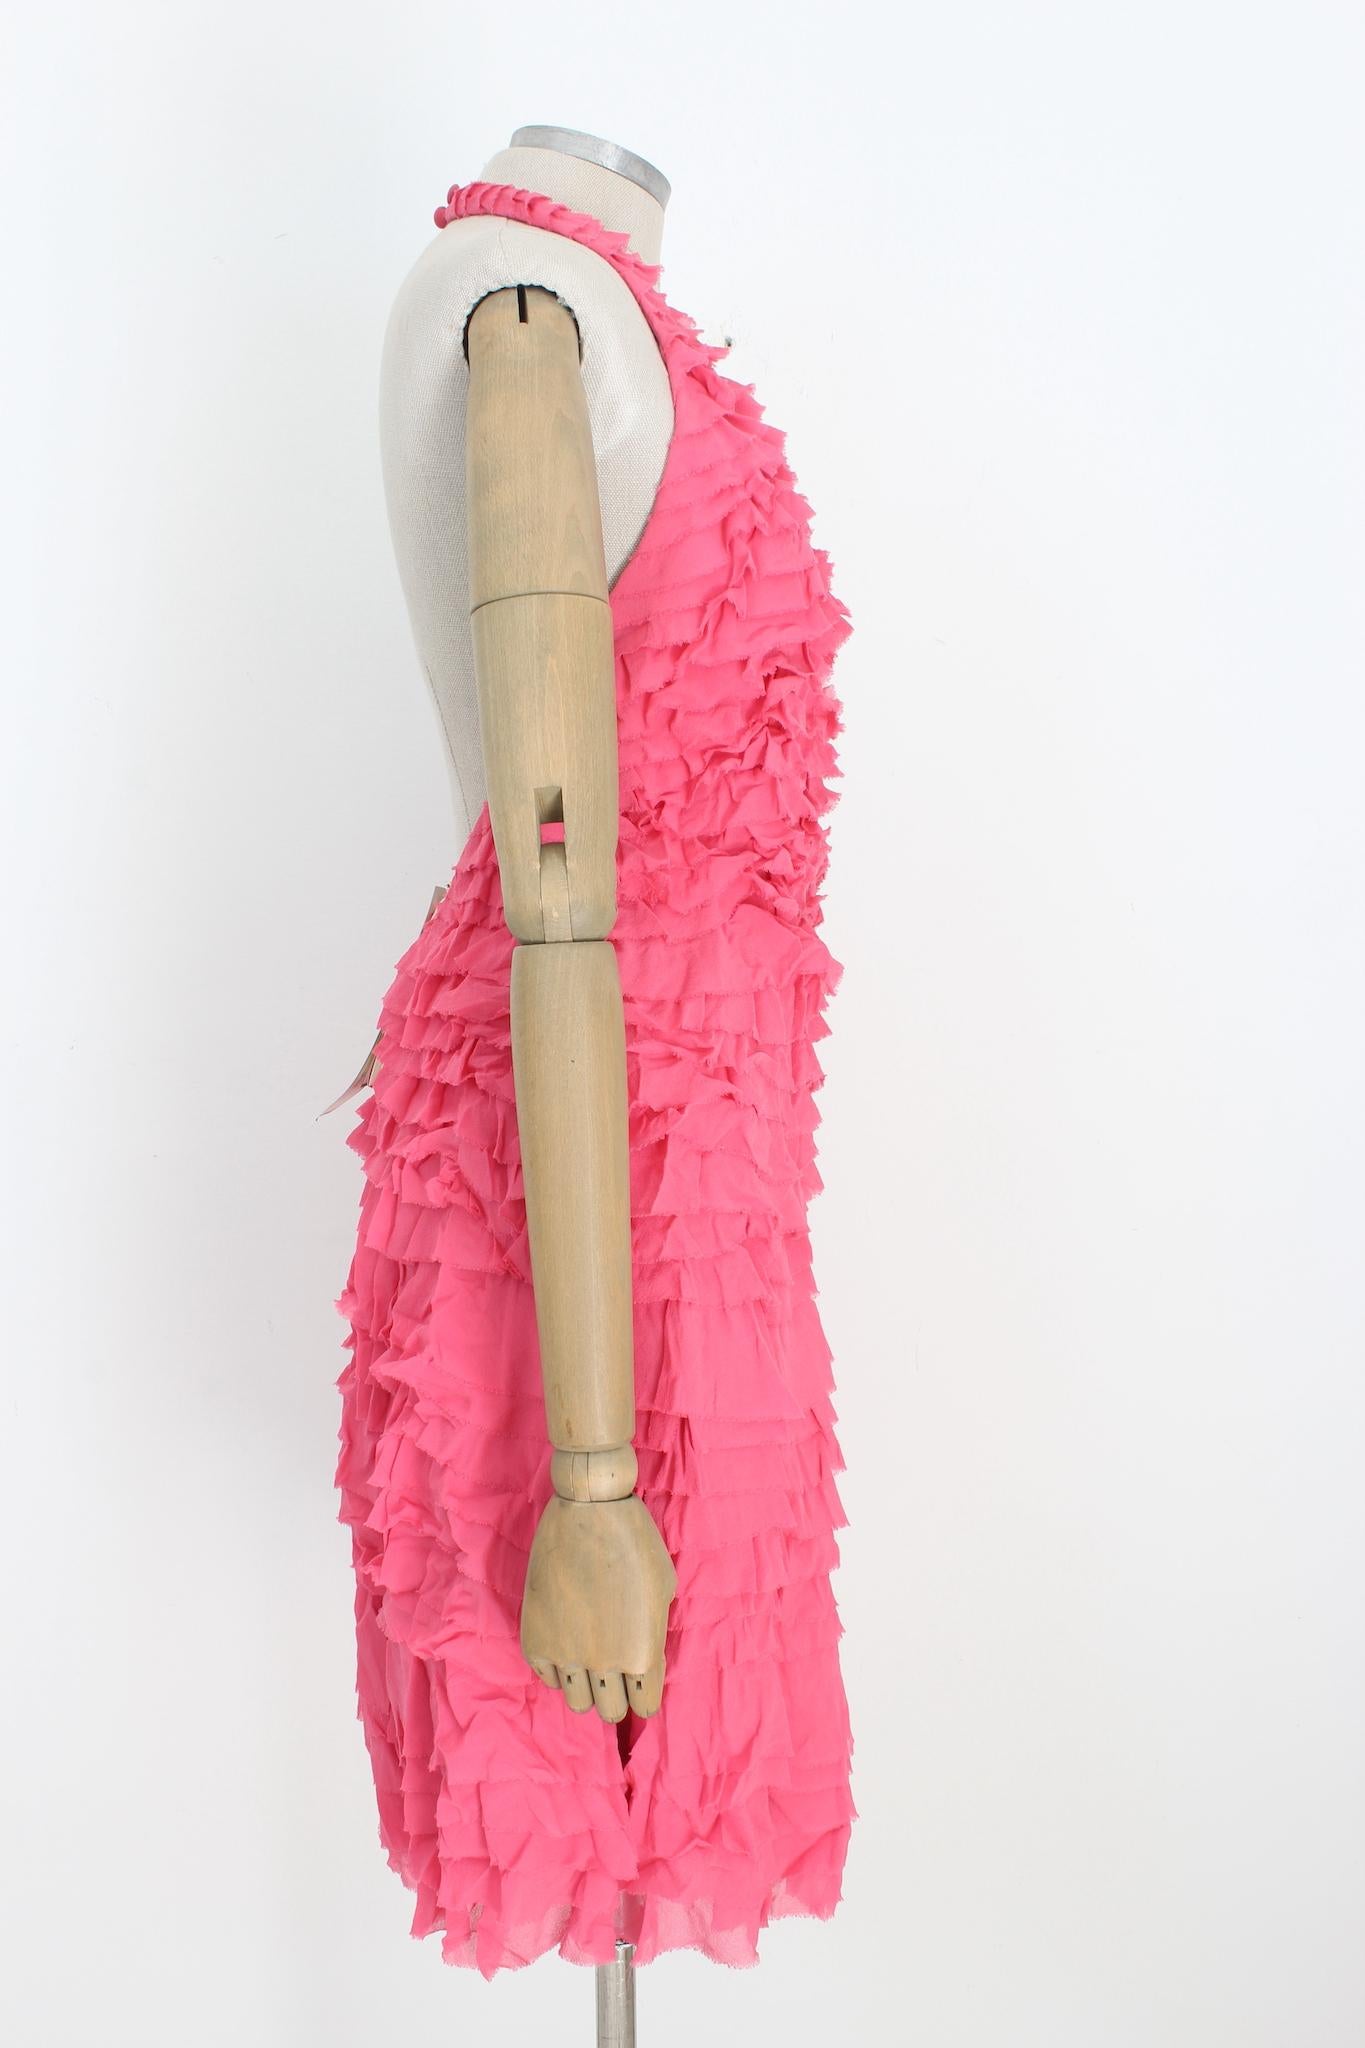 Temperley London Pink Silk Rouffles Cocktail Party Sheath Dress 2000s In New Condition For Sale In Brindisi, Bt